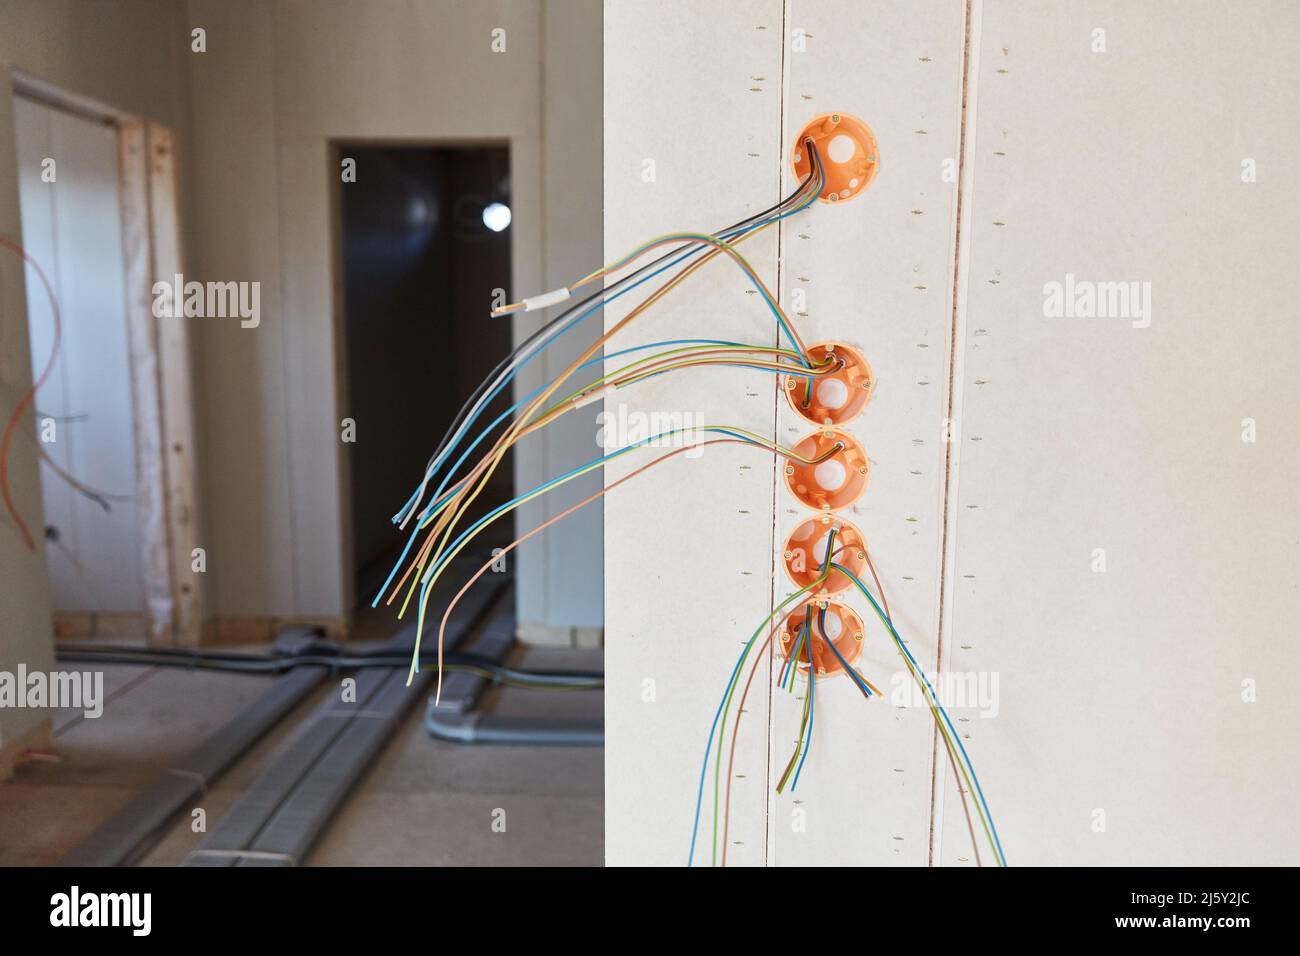 Electrical installation for many light switches in new construction project with loose power cables Stock Photo